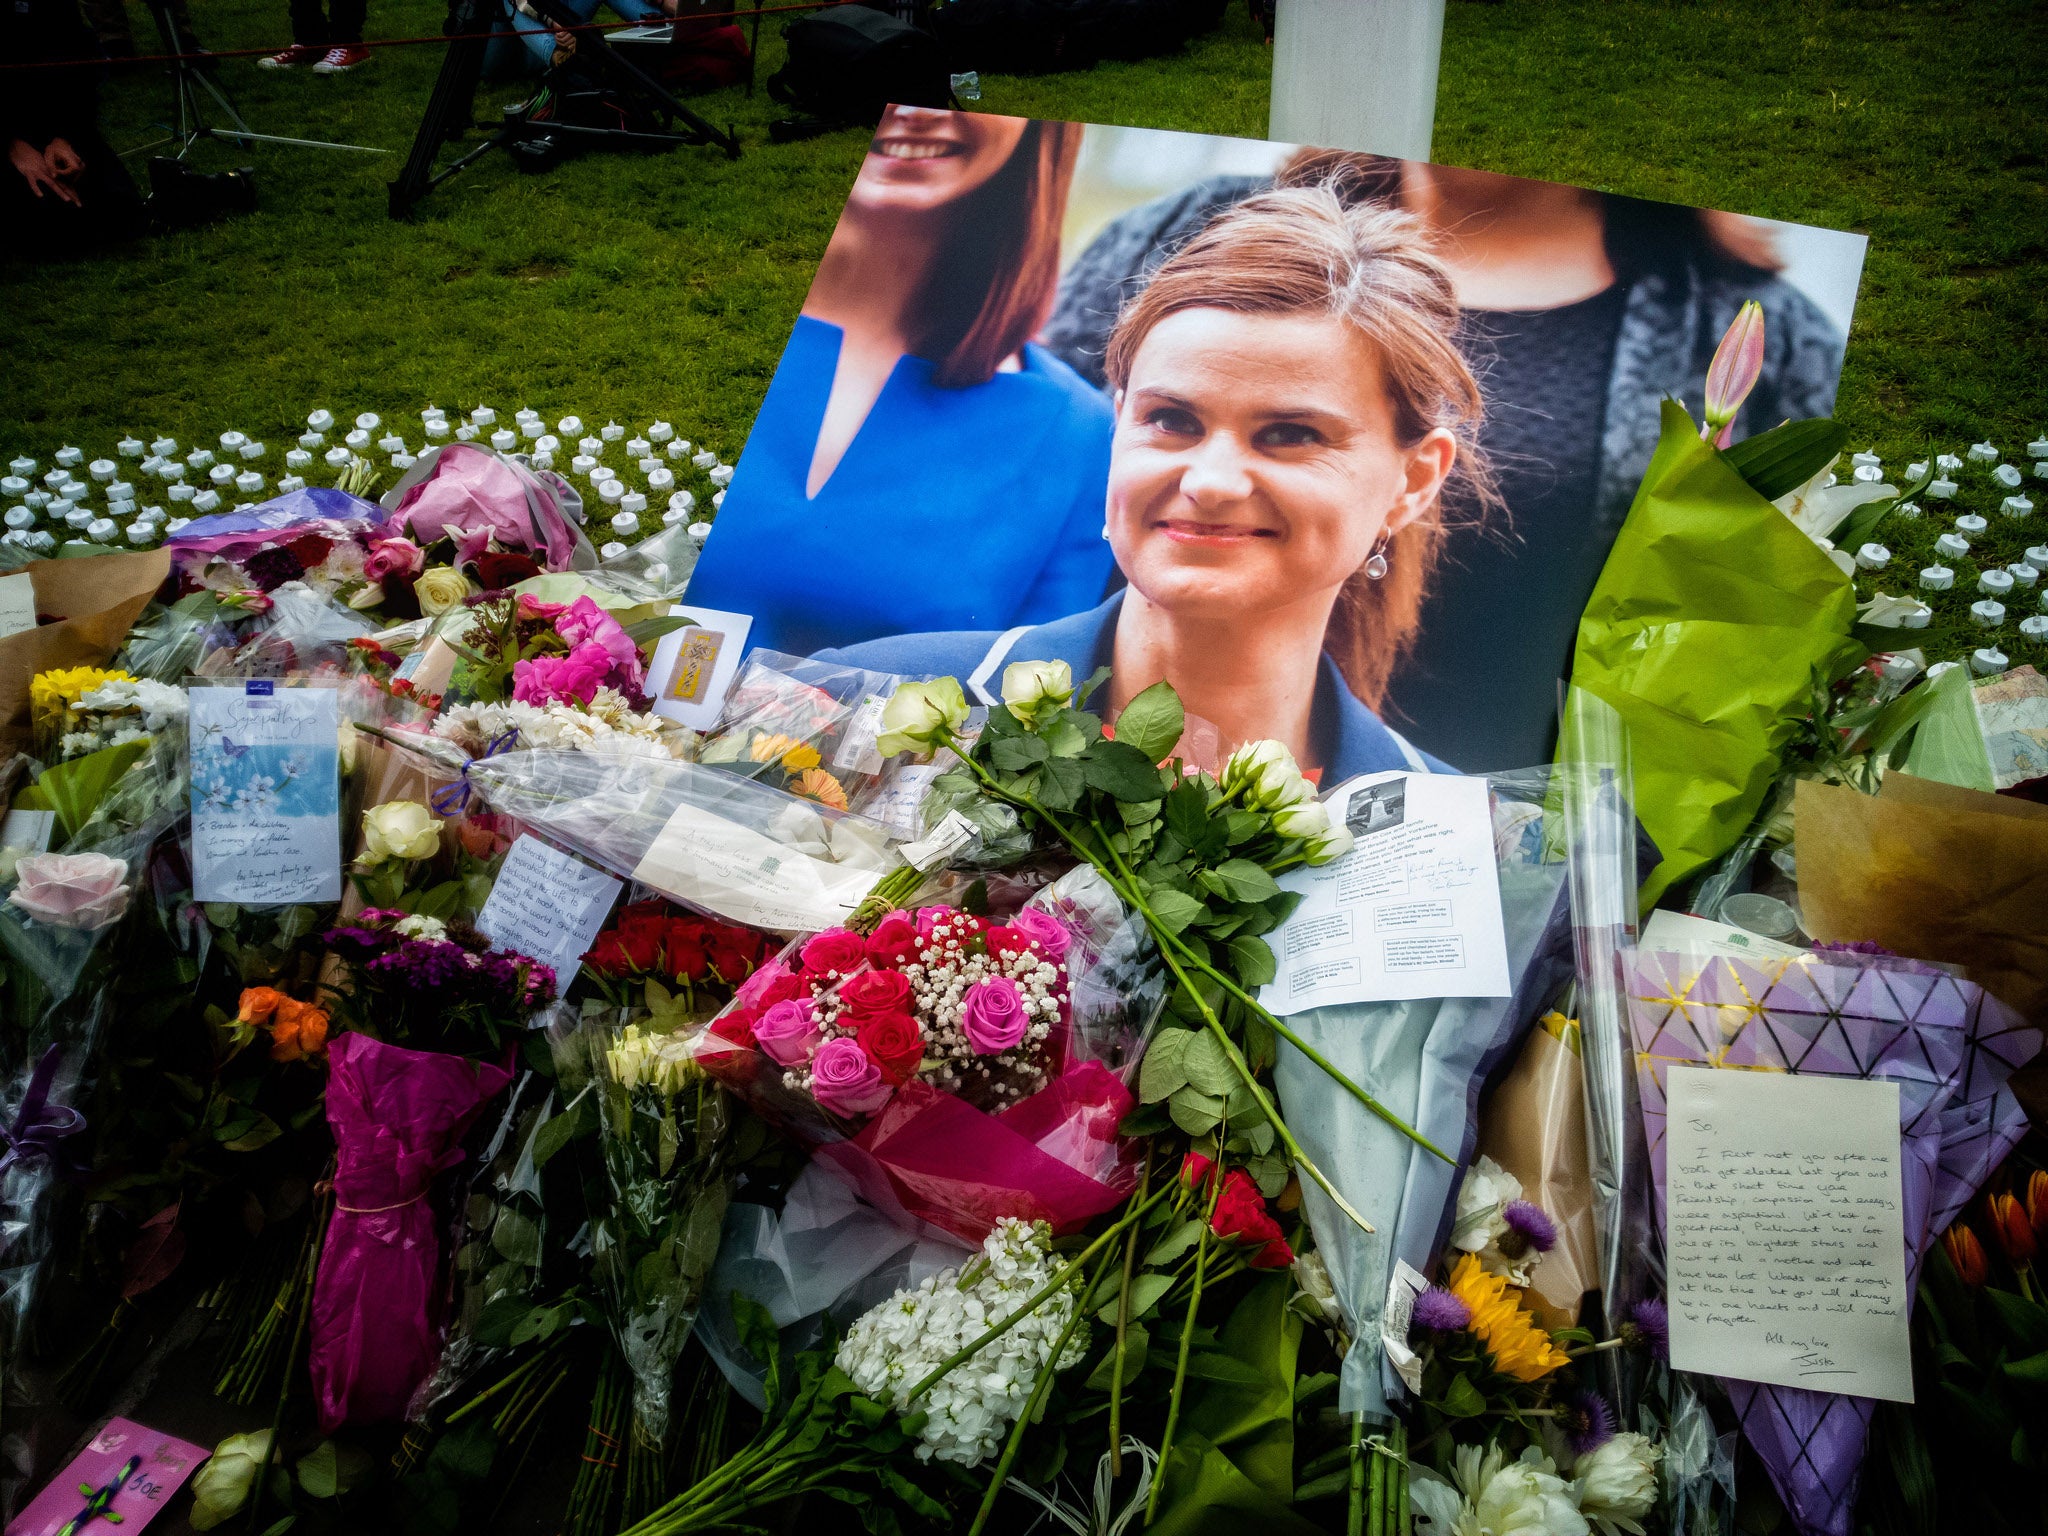 Tributes to murdered MP Jo Cox